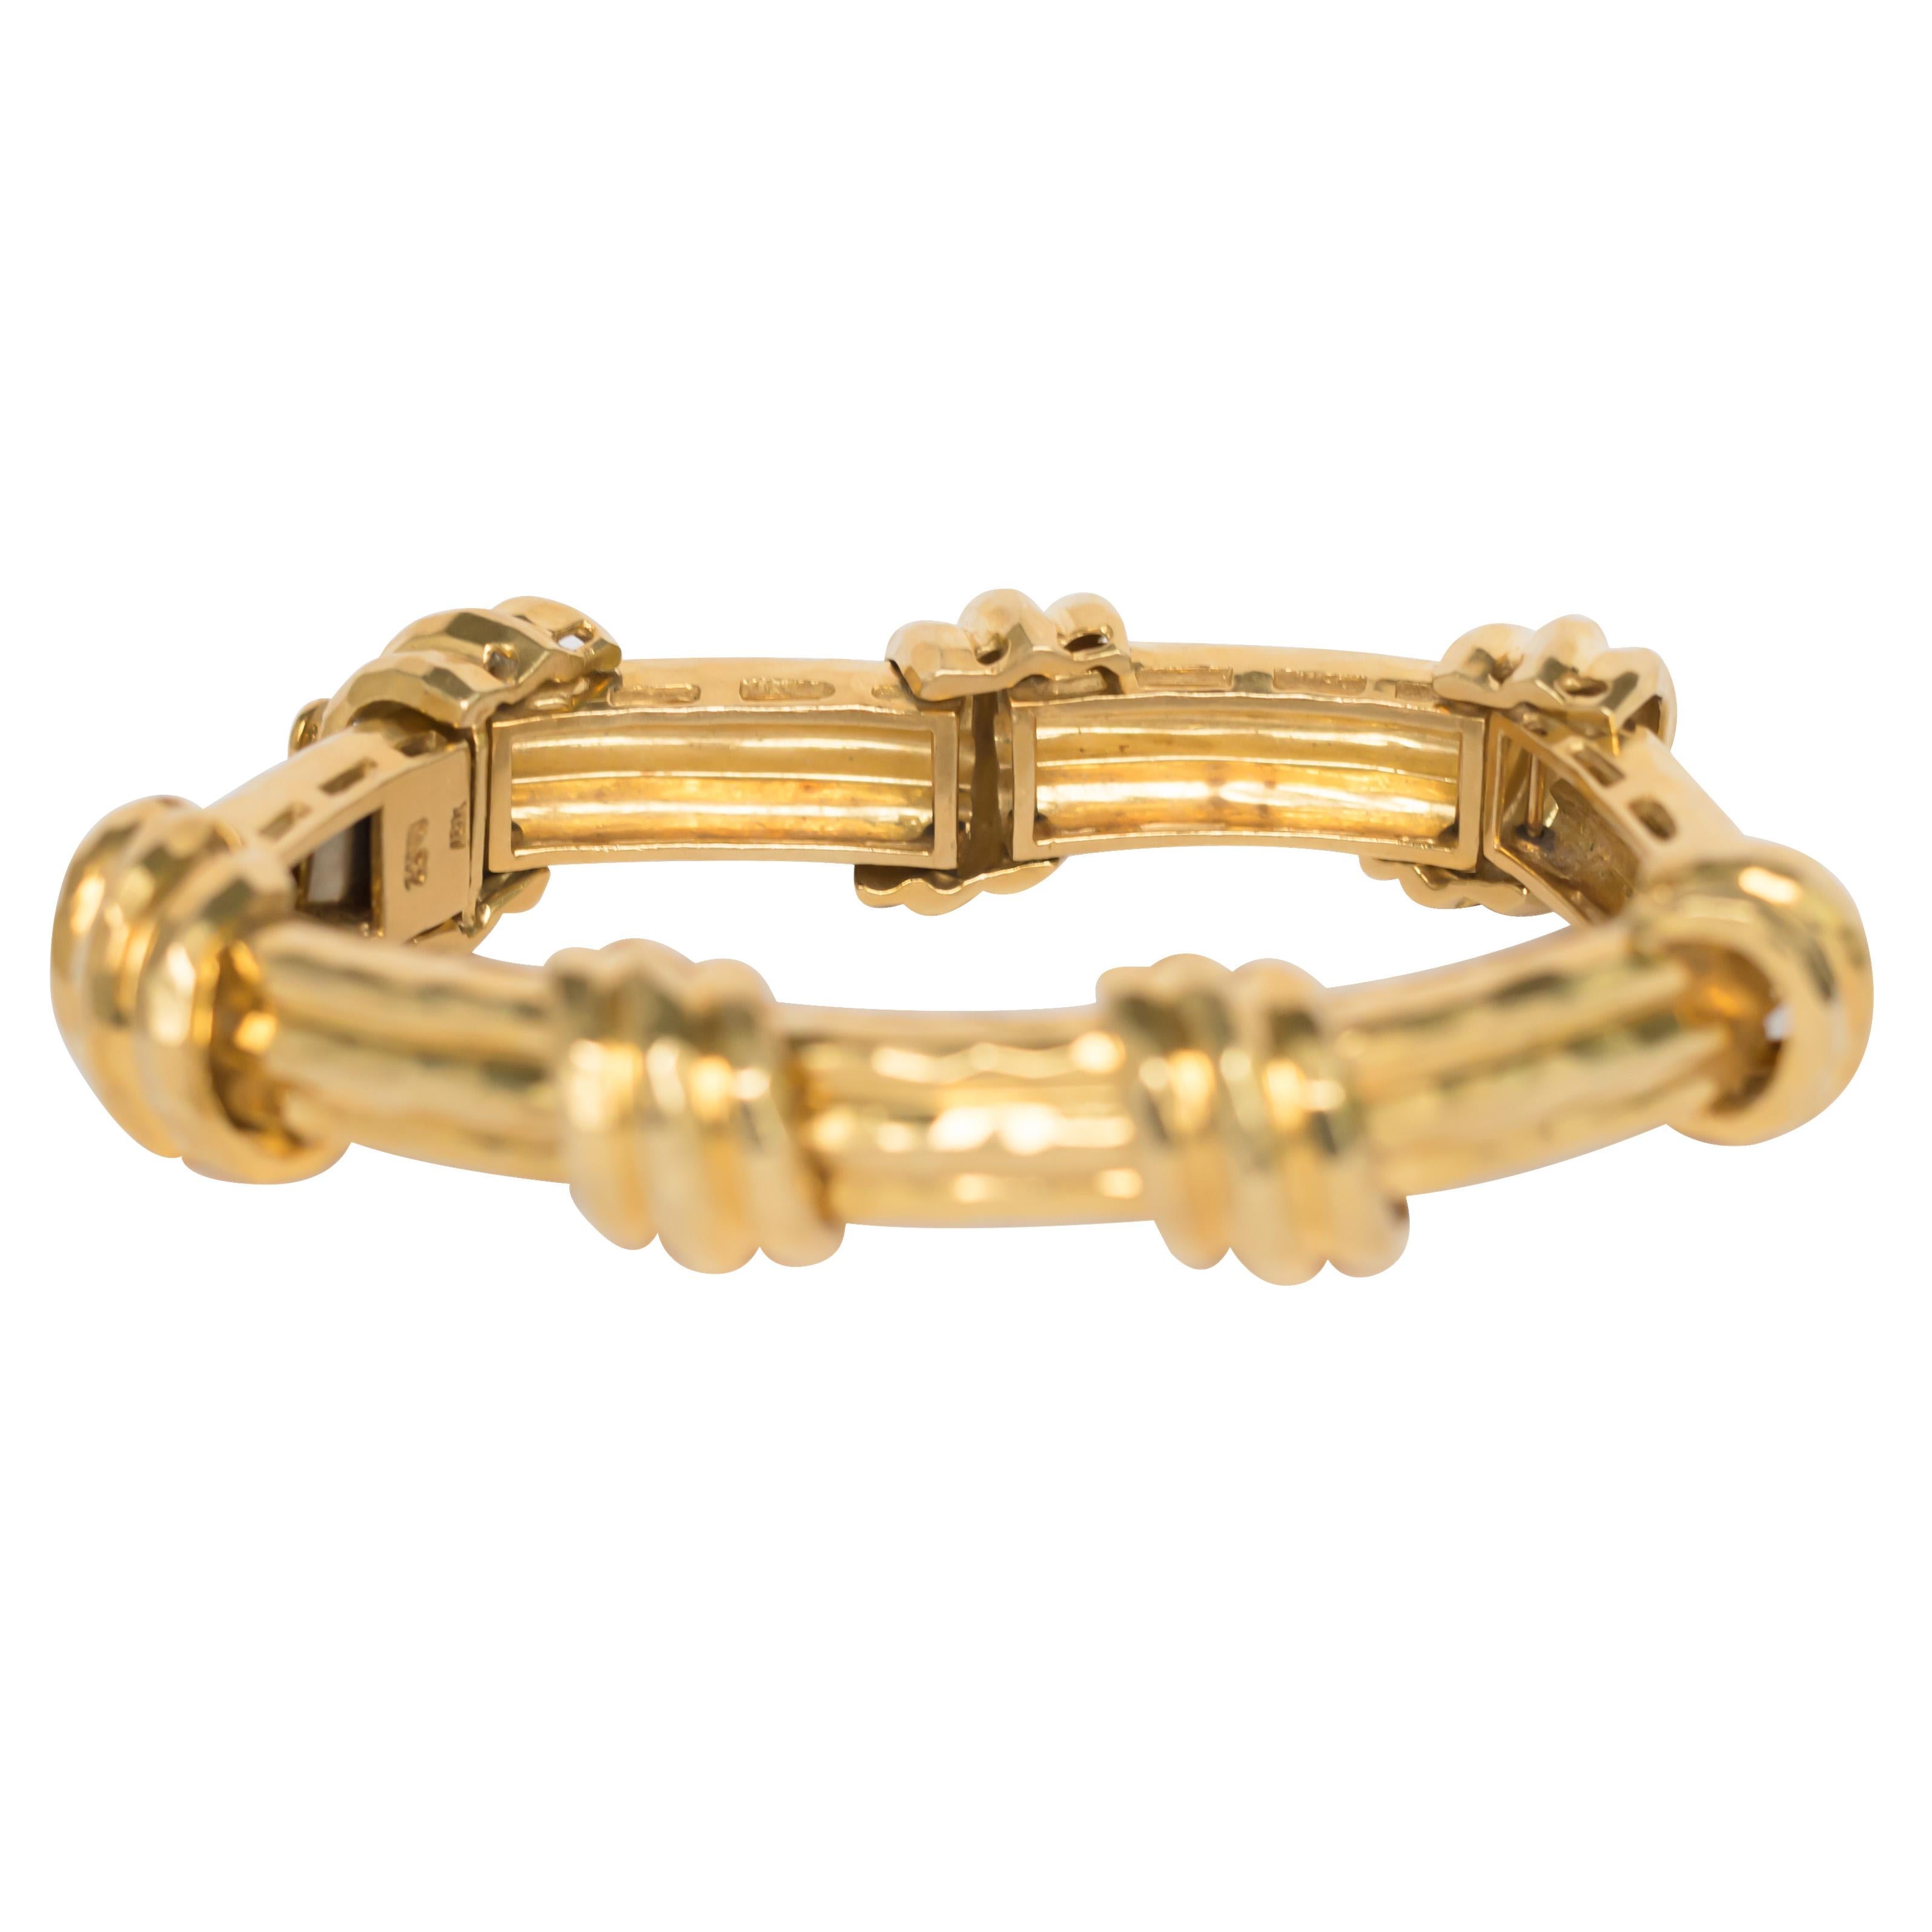 Length: 7.50 inches 
Metal Type: 18 karat Yellow Gold 
Weight: 76.4 grams

Finger to Top of Stone Measurement: 8.00mm